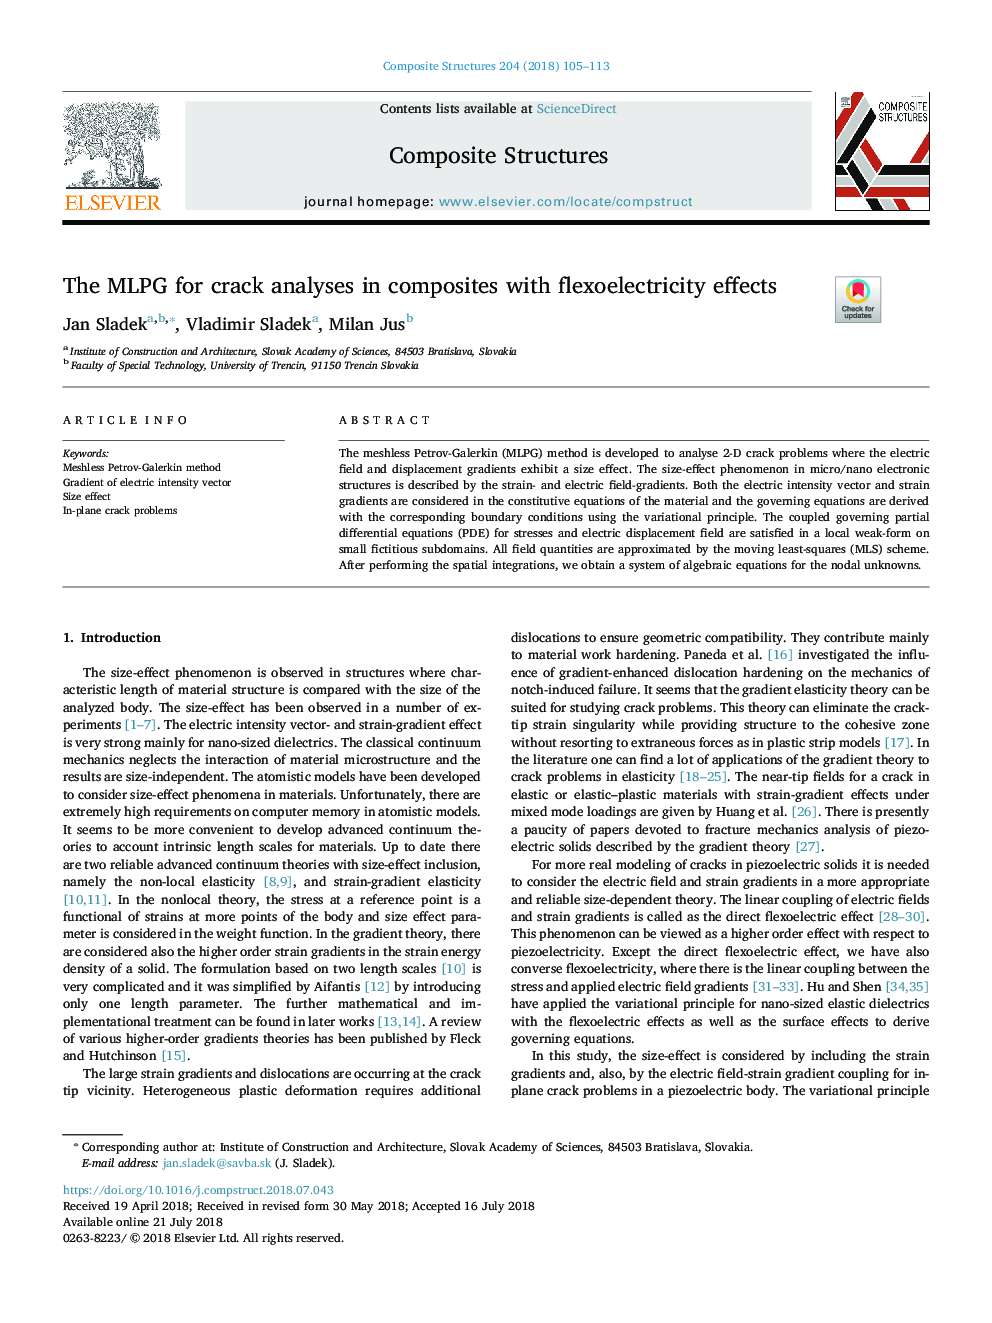 The MLPG for crack analyses in composites with flexoelectricity effects